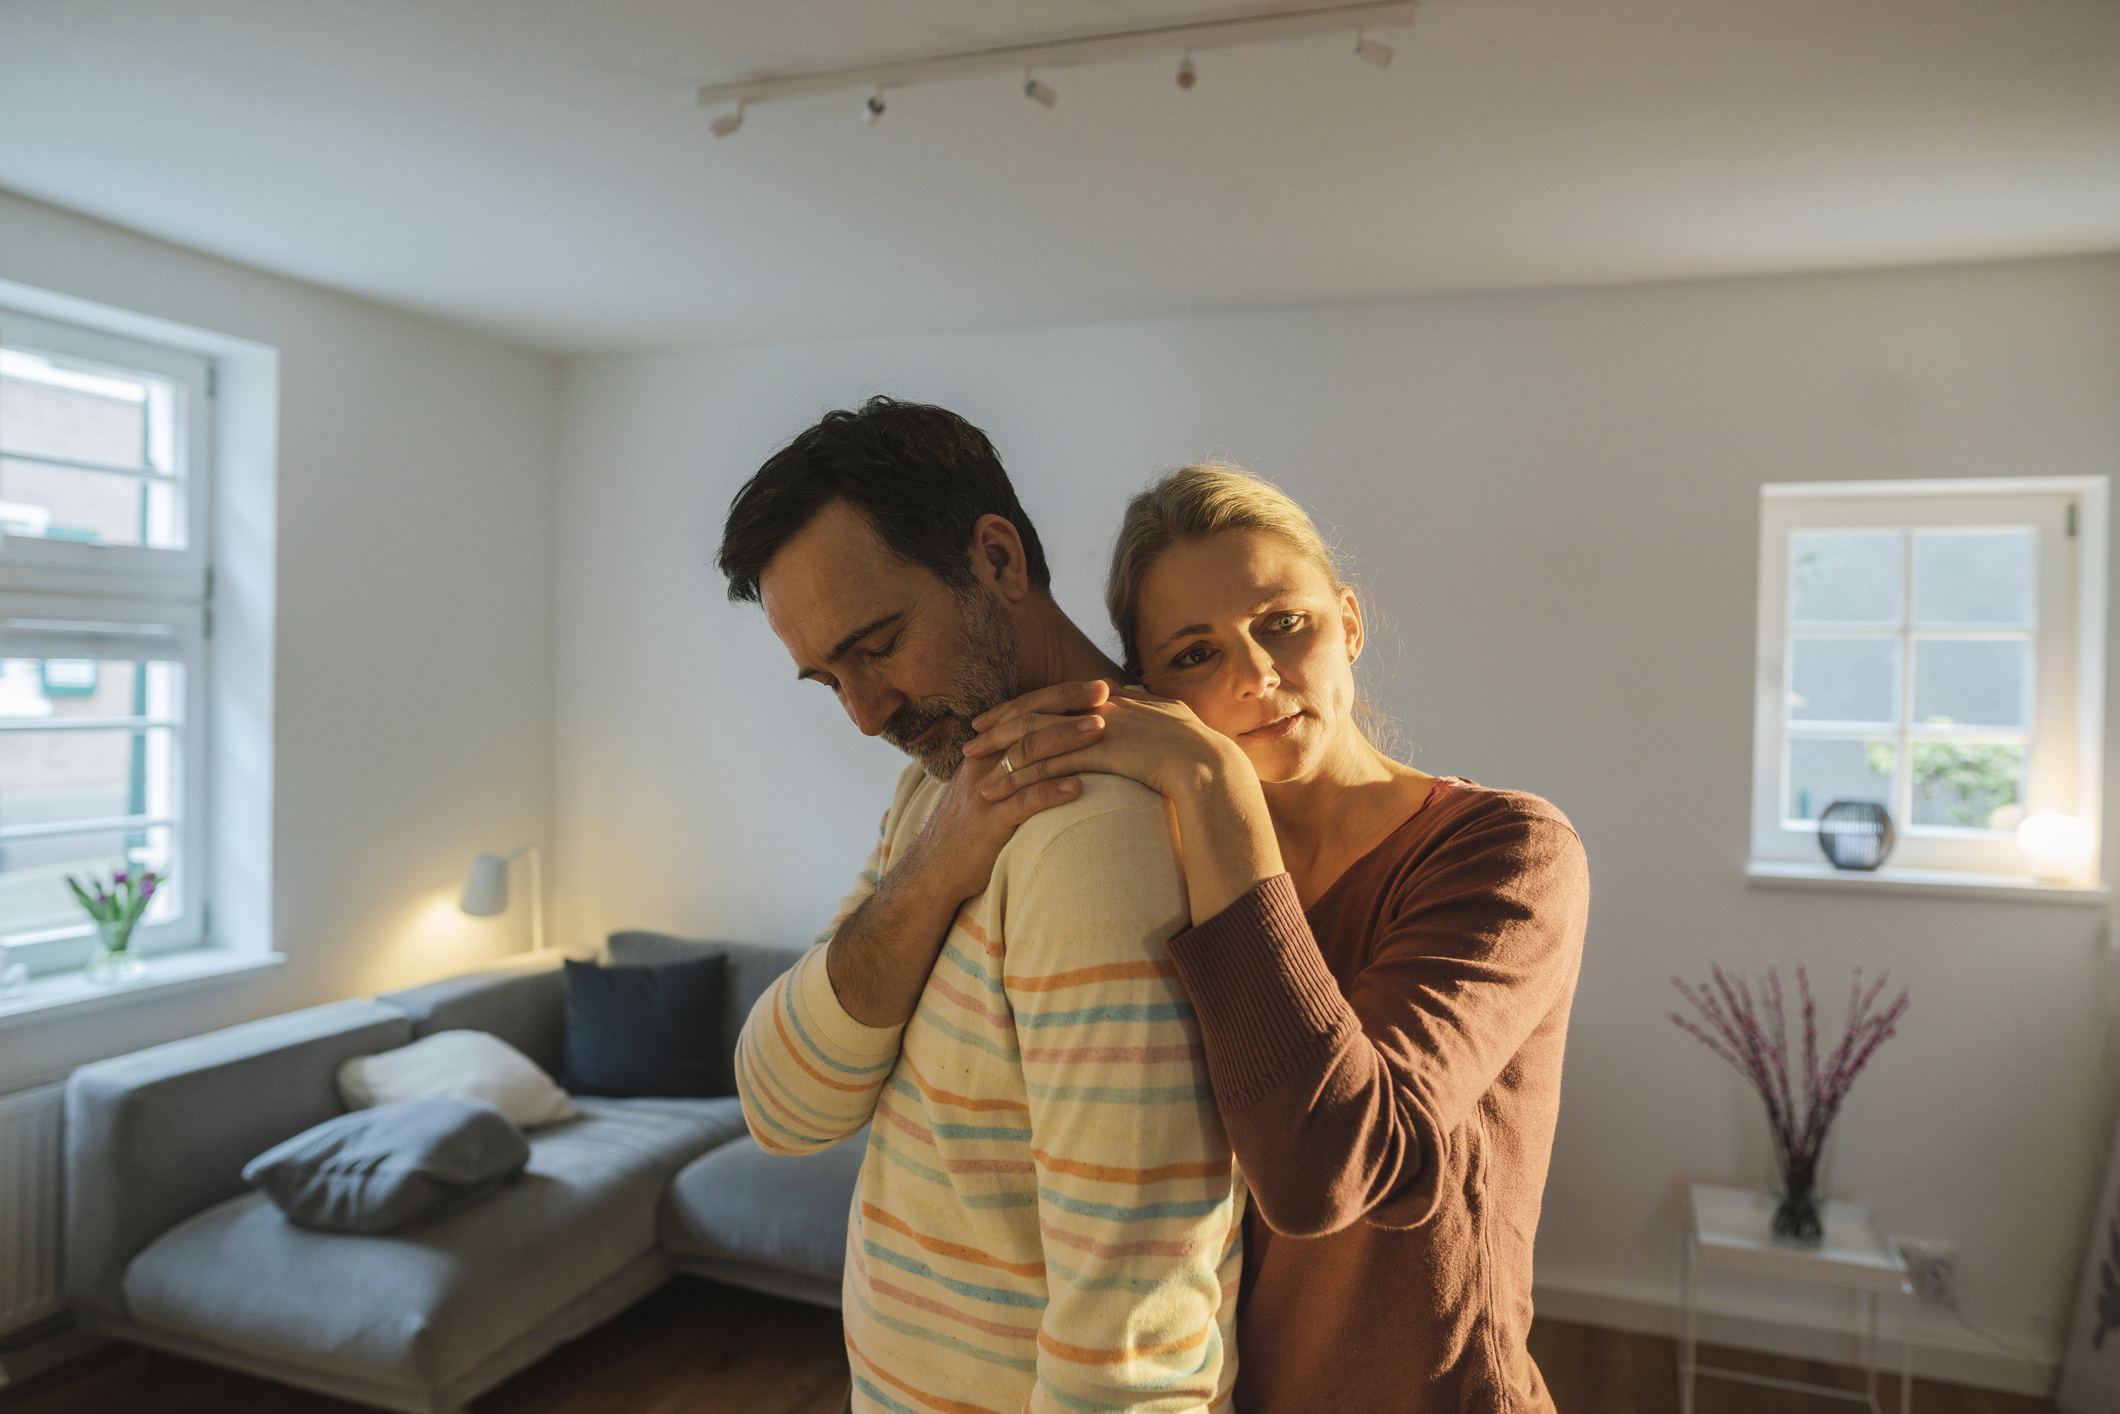 Woman embracing man from behind, both look thoughtful, in a living room setting